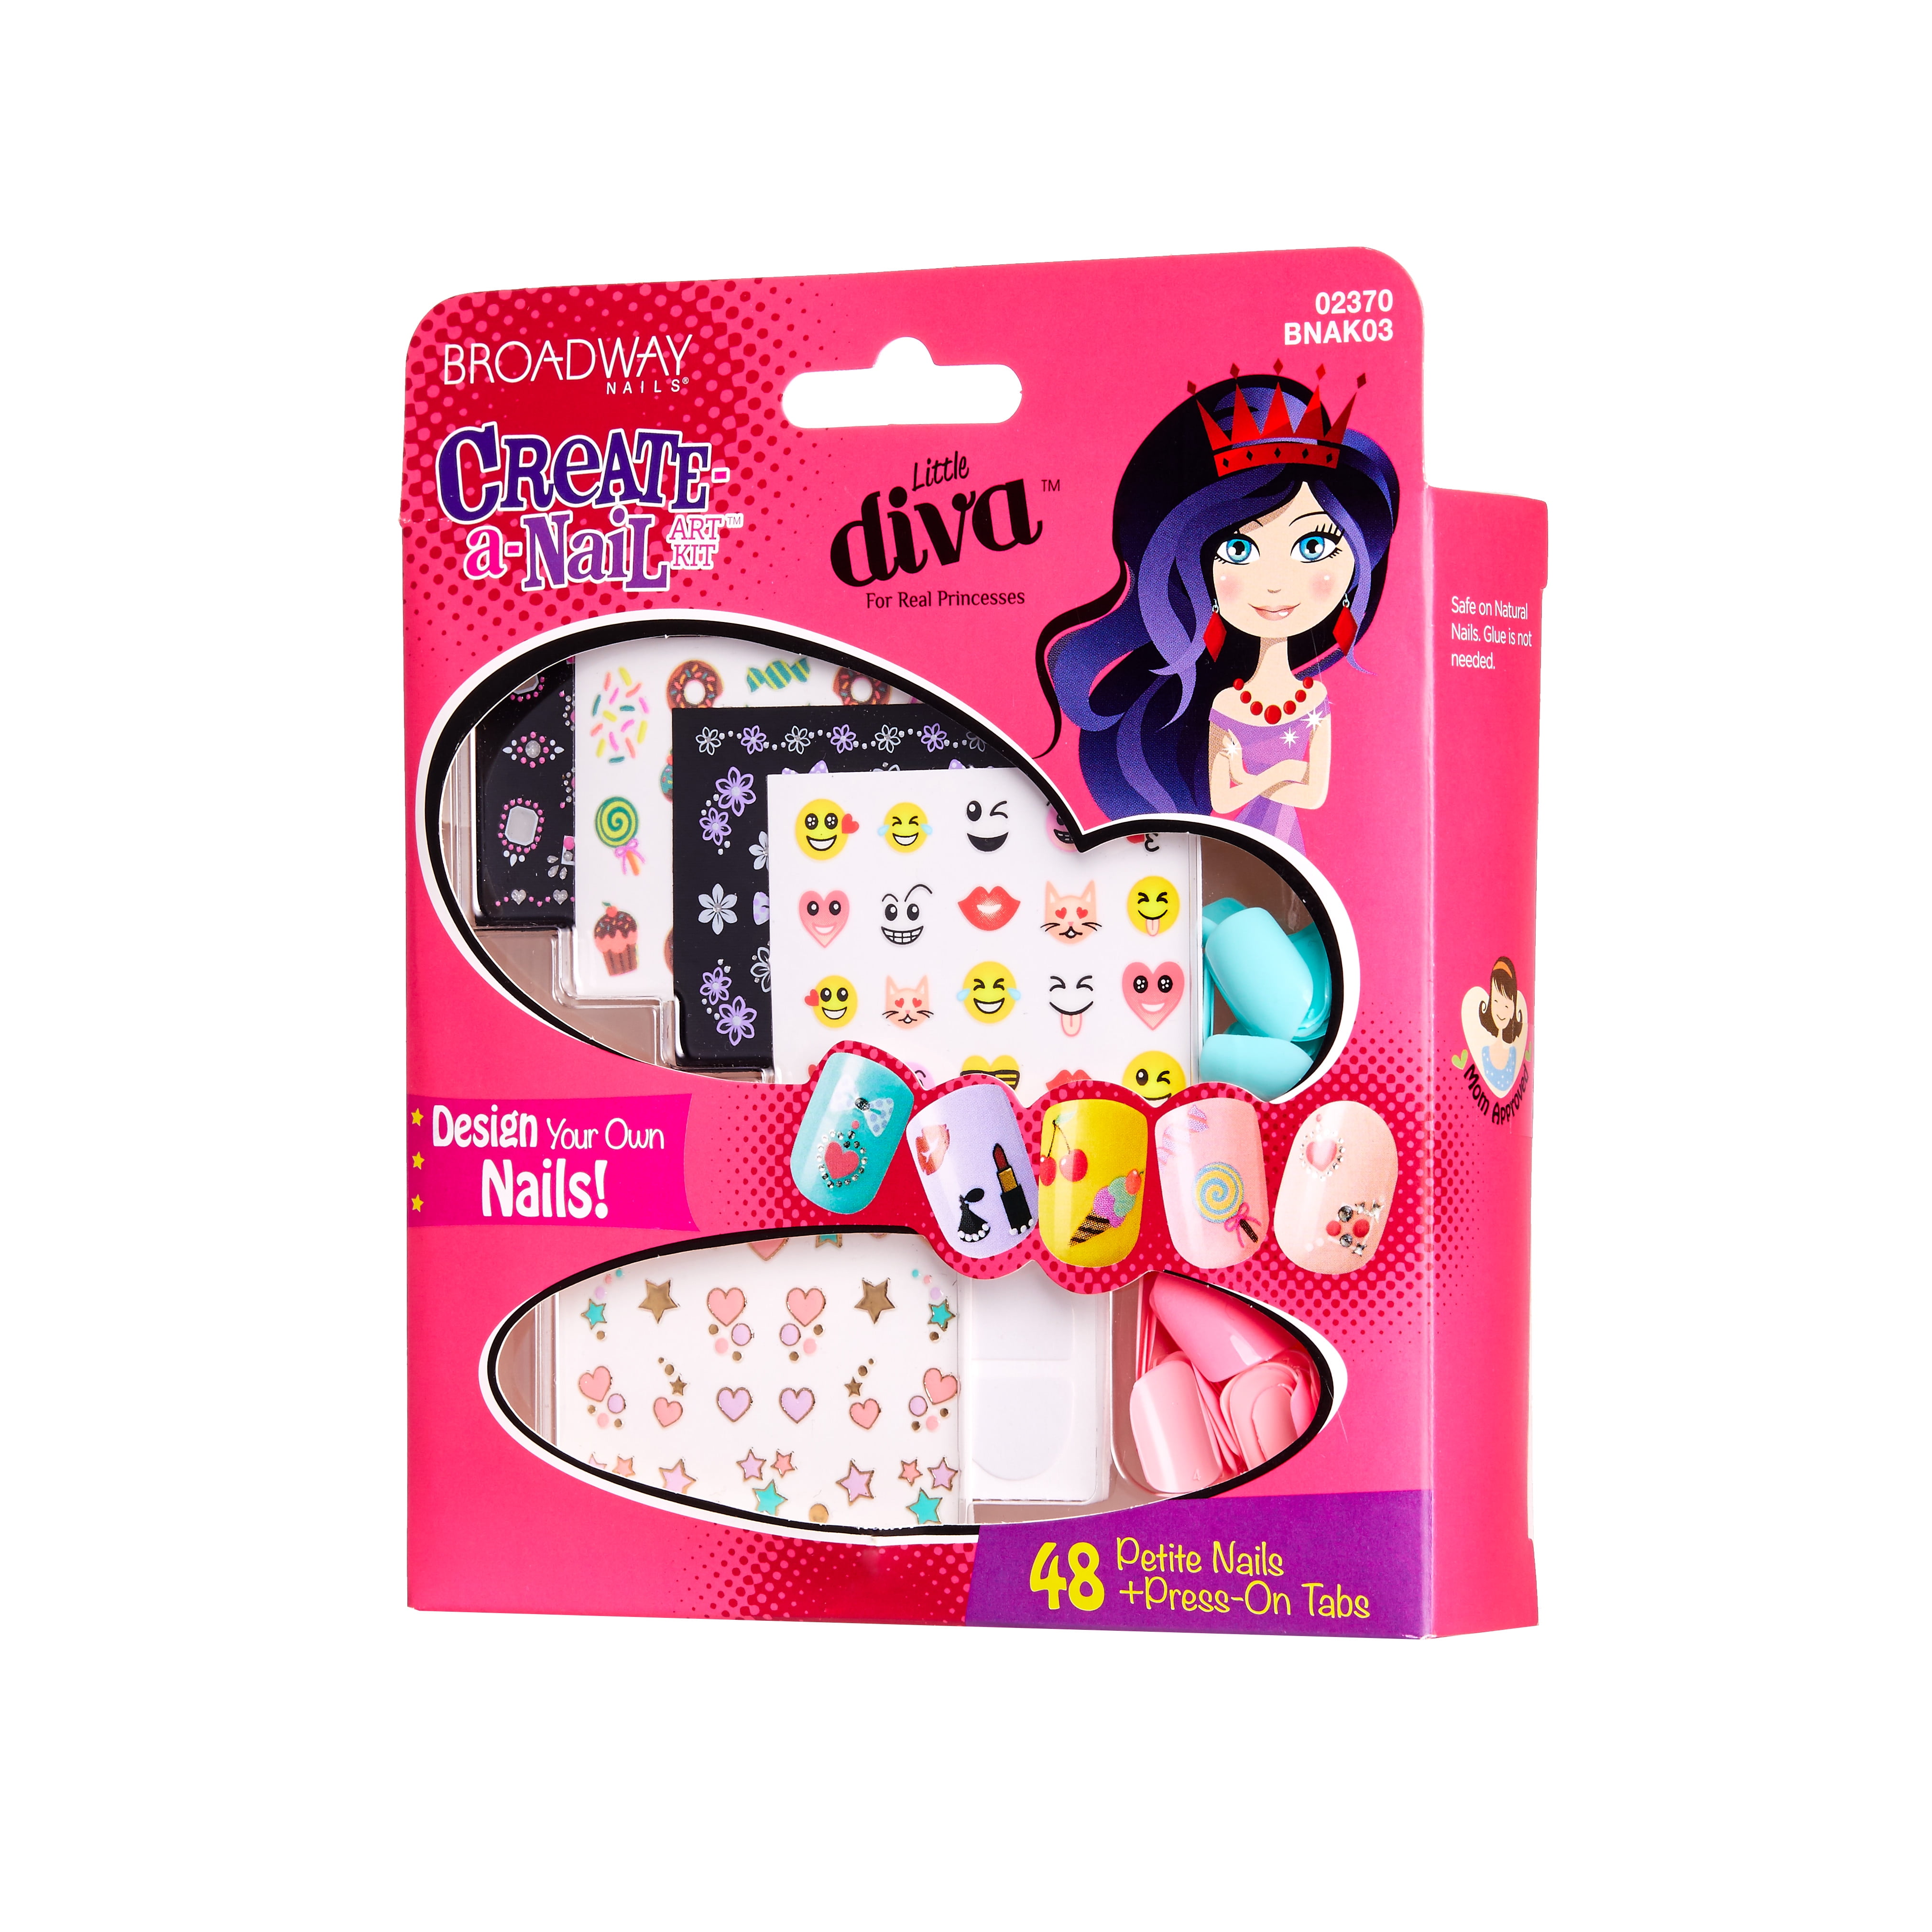 Little Diva Broadway Gel Candy Nails Stick On (Party Stars) : Amazon.ca:  Beauty & Personal Care